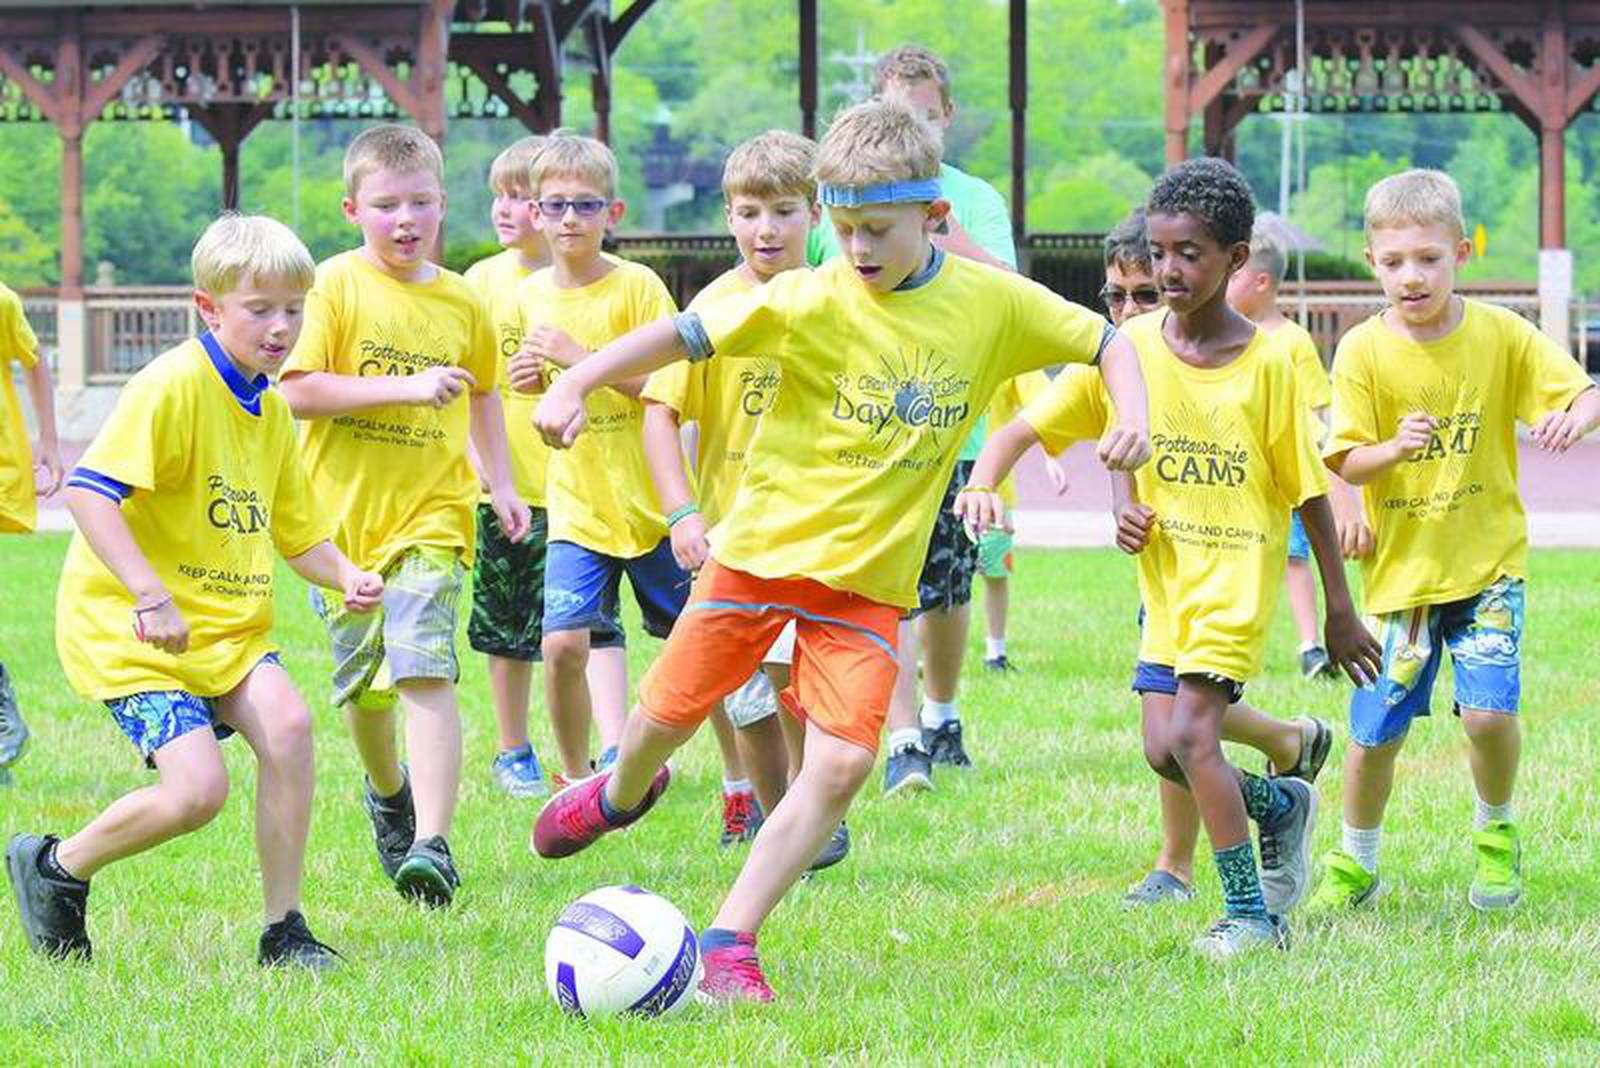 Summer camps are coming to St. Charles Shaw Local